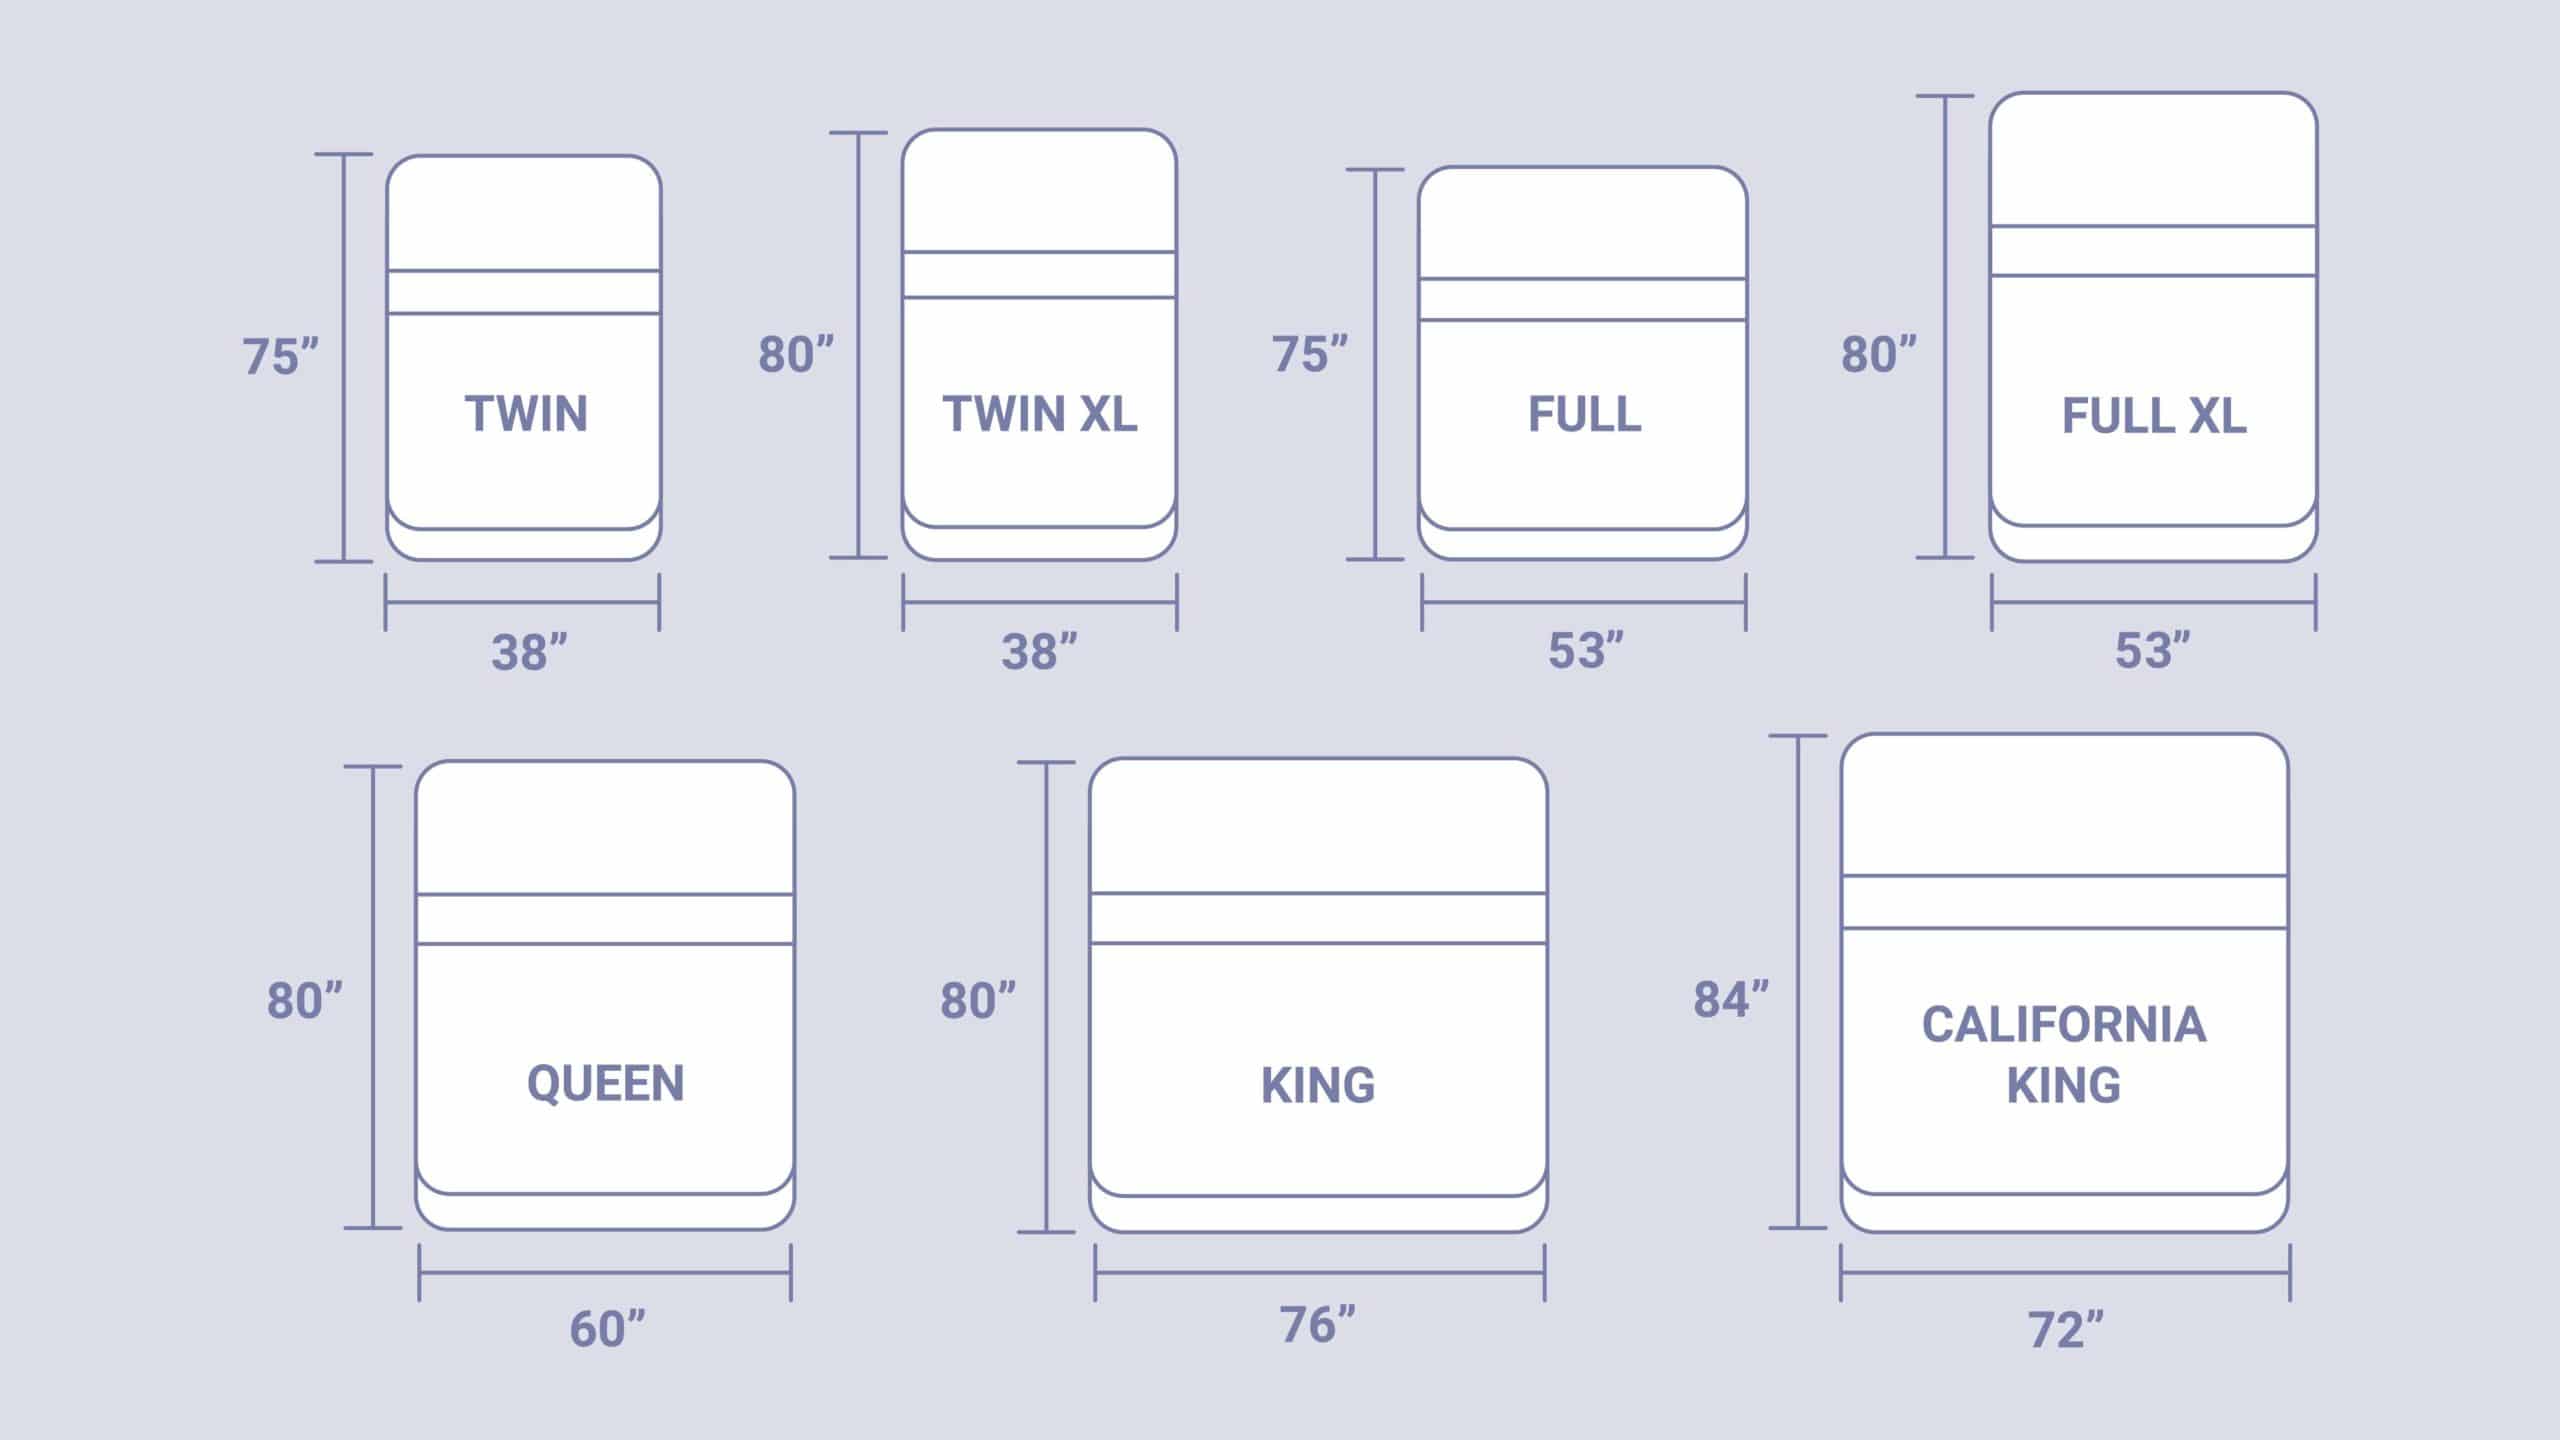 Mattress Sizes And Dimensions Guide, Is There A Difference Between Single And Twin Bed